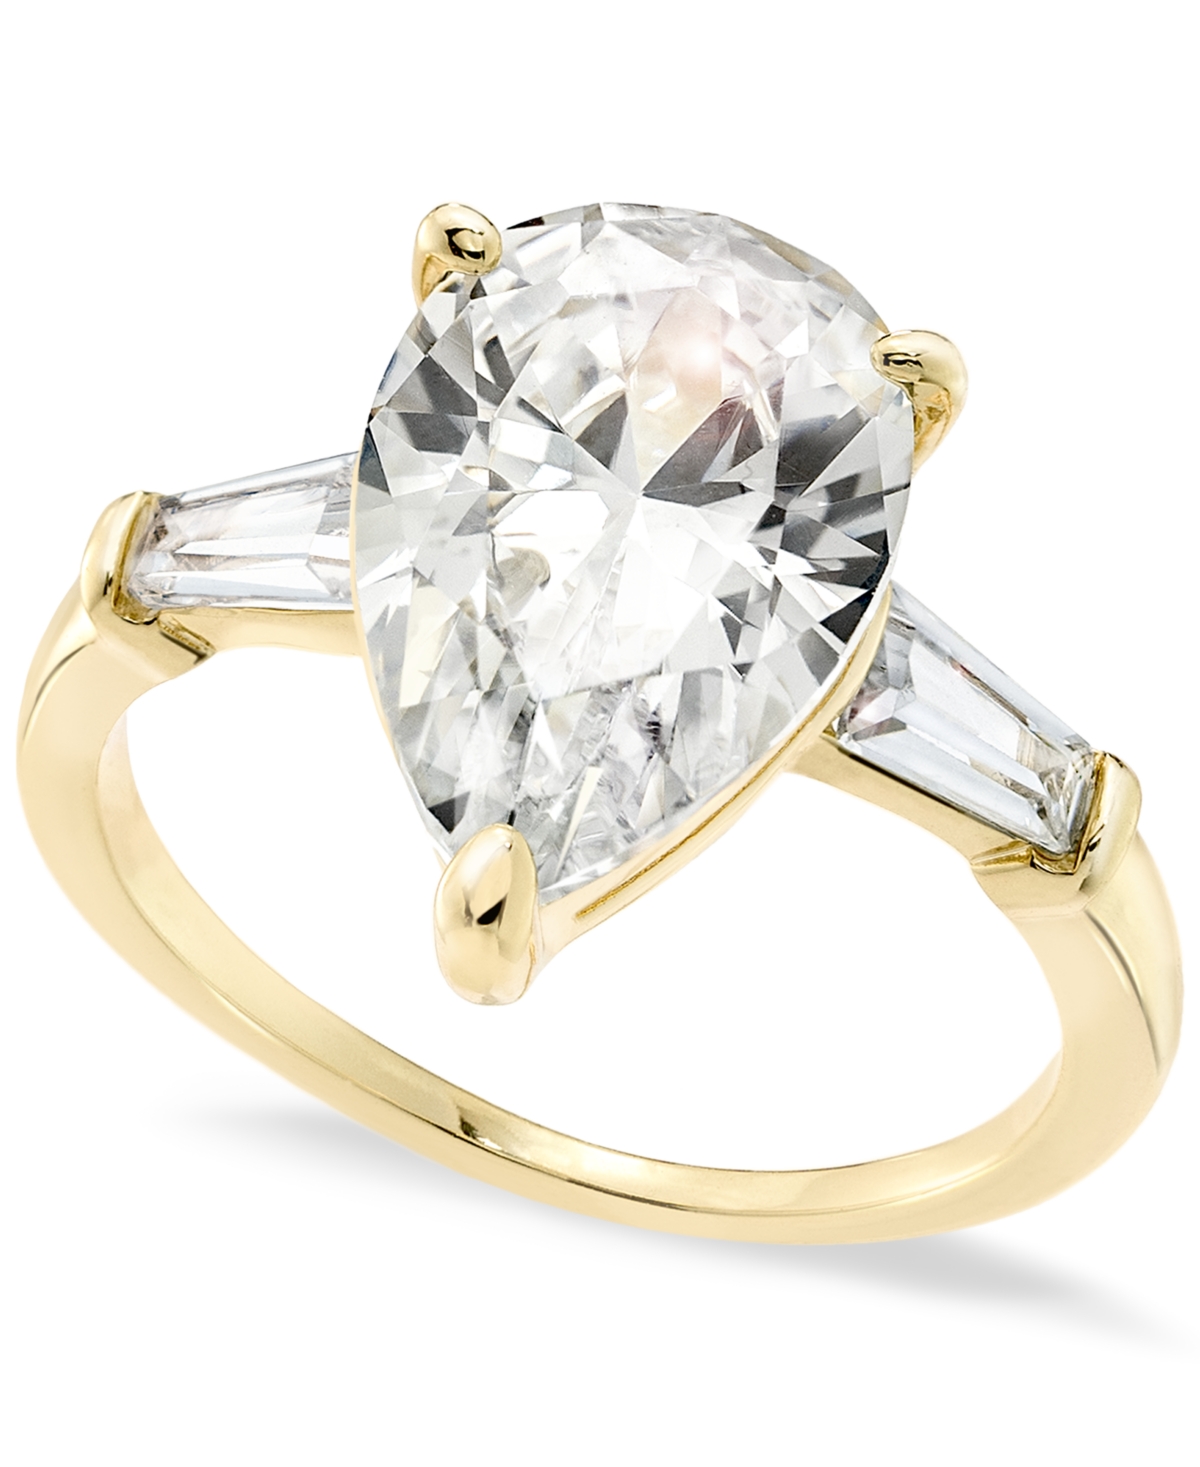 Gold-Tone Pear-Shape & Baguette-Cut Cubic Zirconia Ring, Created for Macy's - Gold